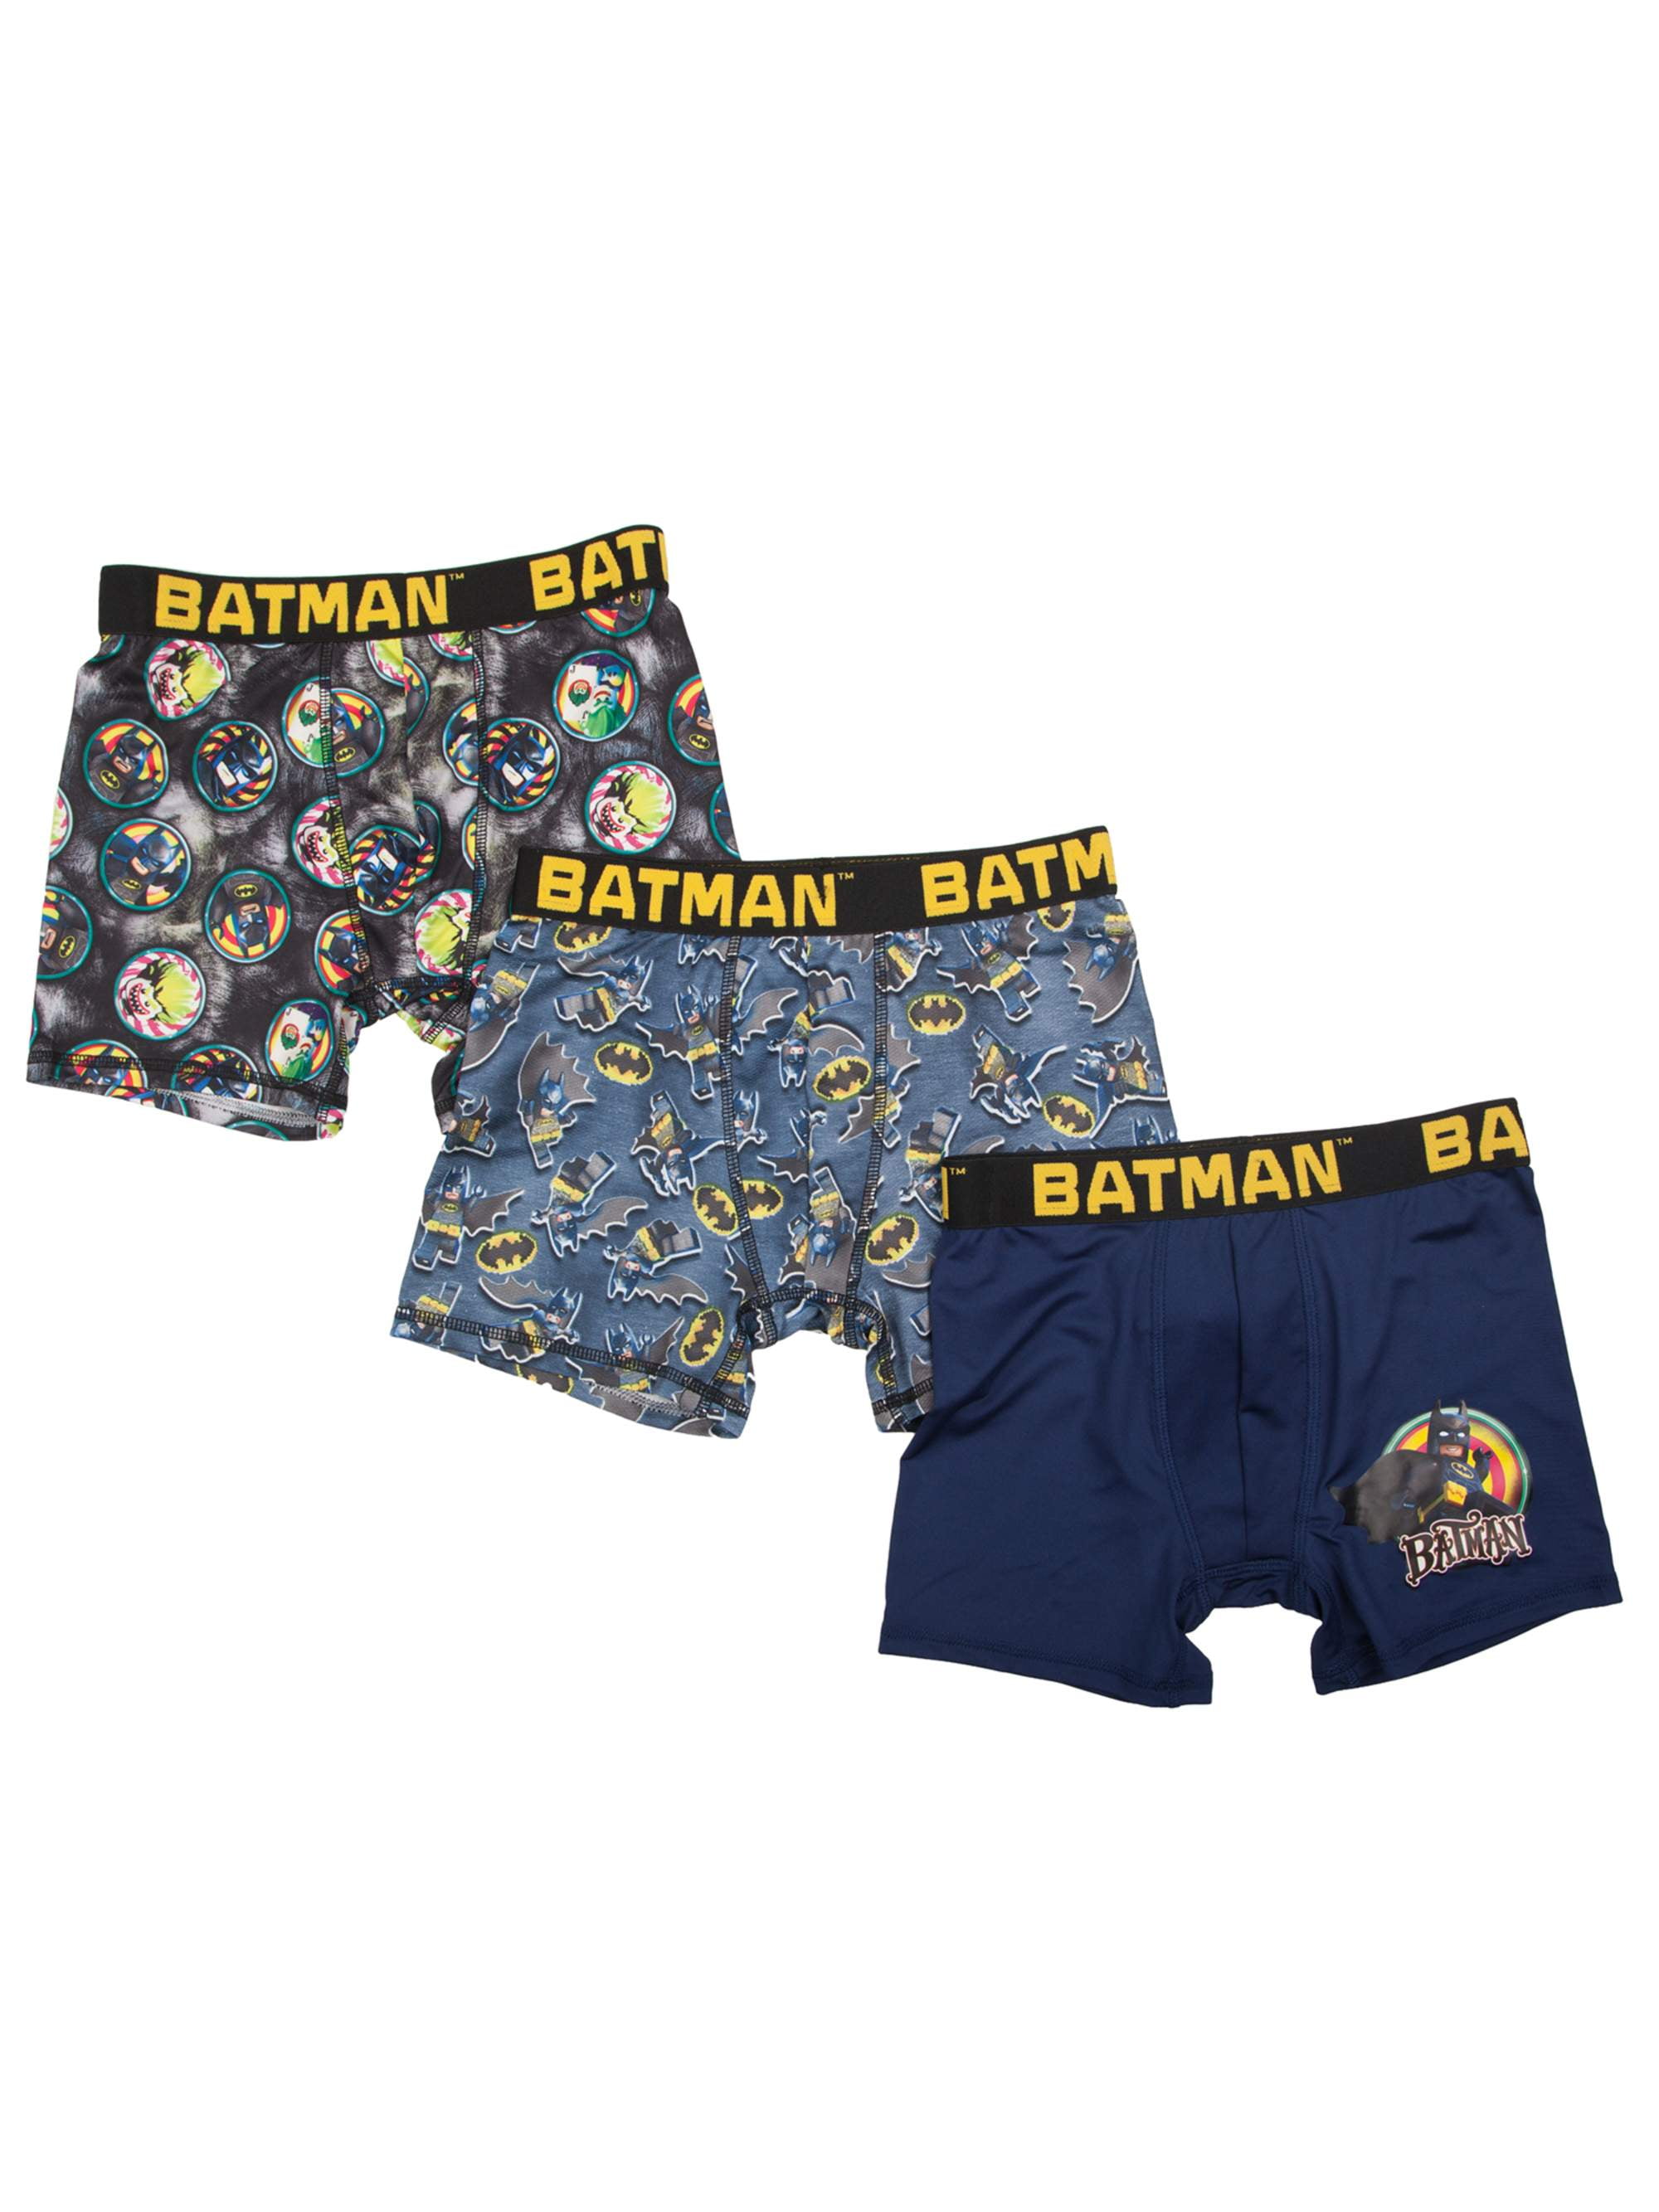 Five Nights At Freddy's Boy's Athletic Boxer Briefs Underoos SMALL 3 Pack Celebr